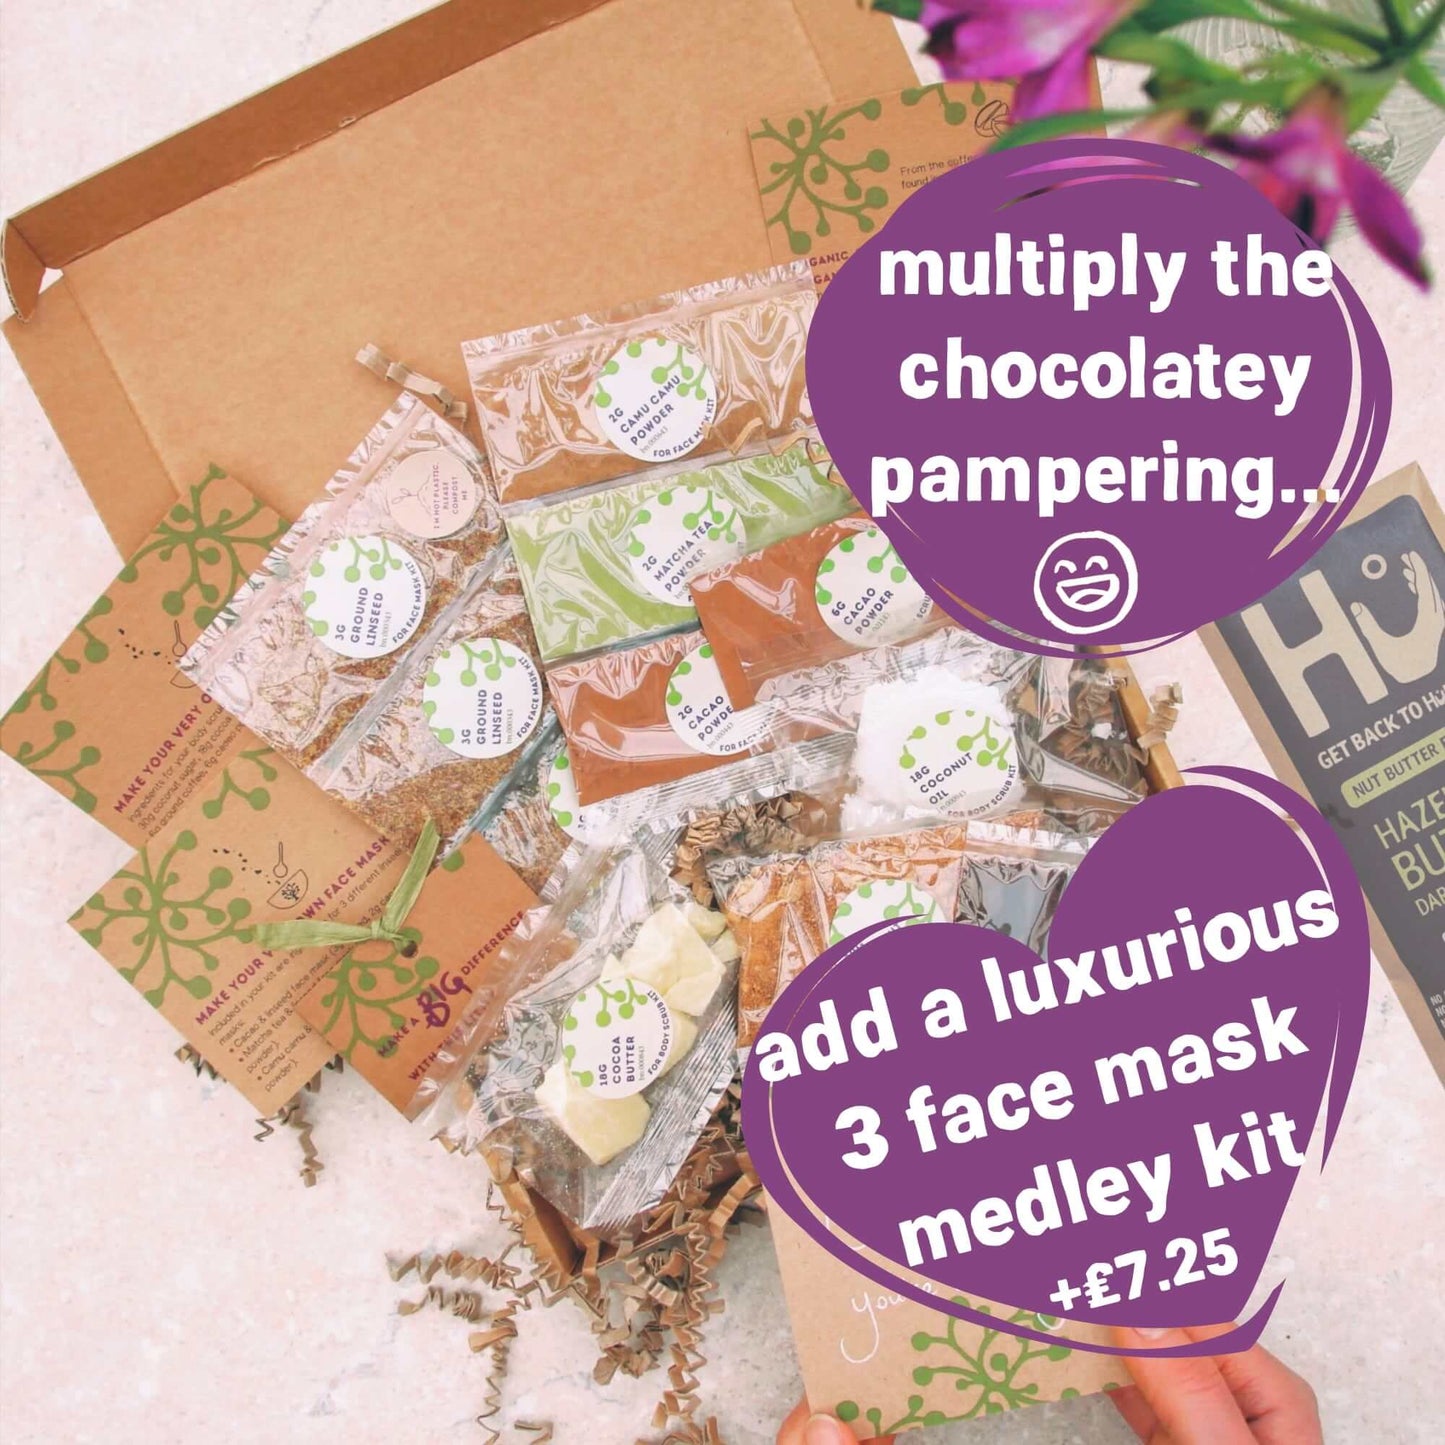 organic vegan face mask kit to add to pamper letterbox gift